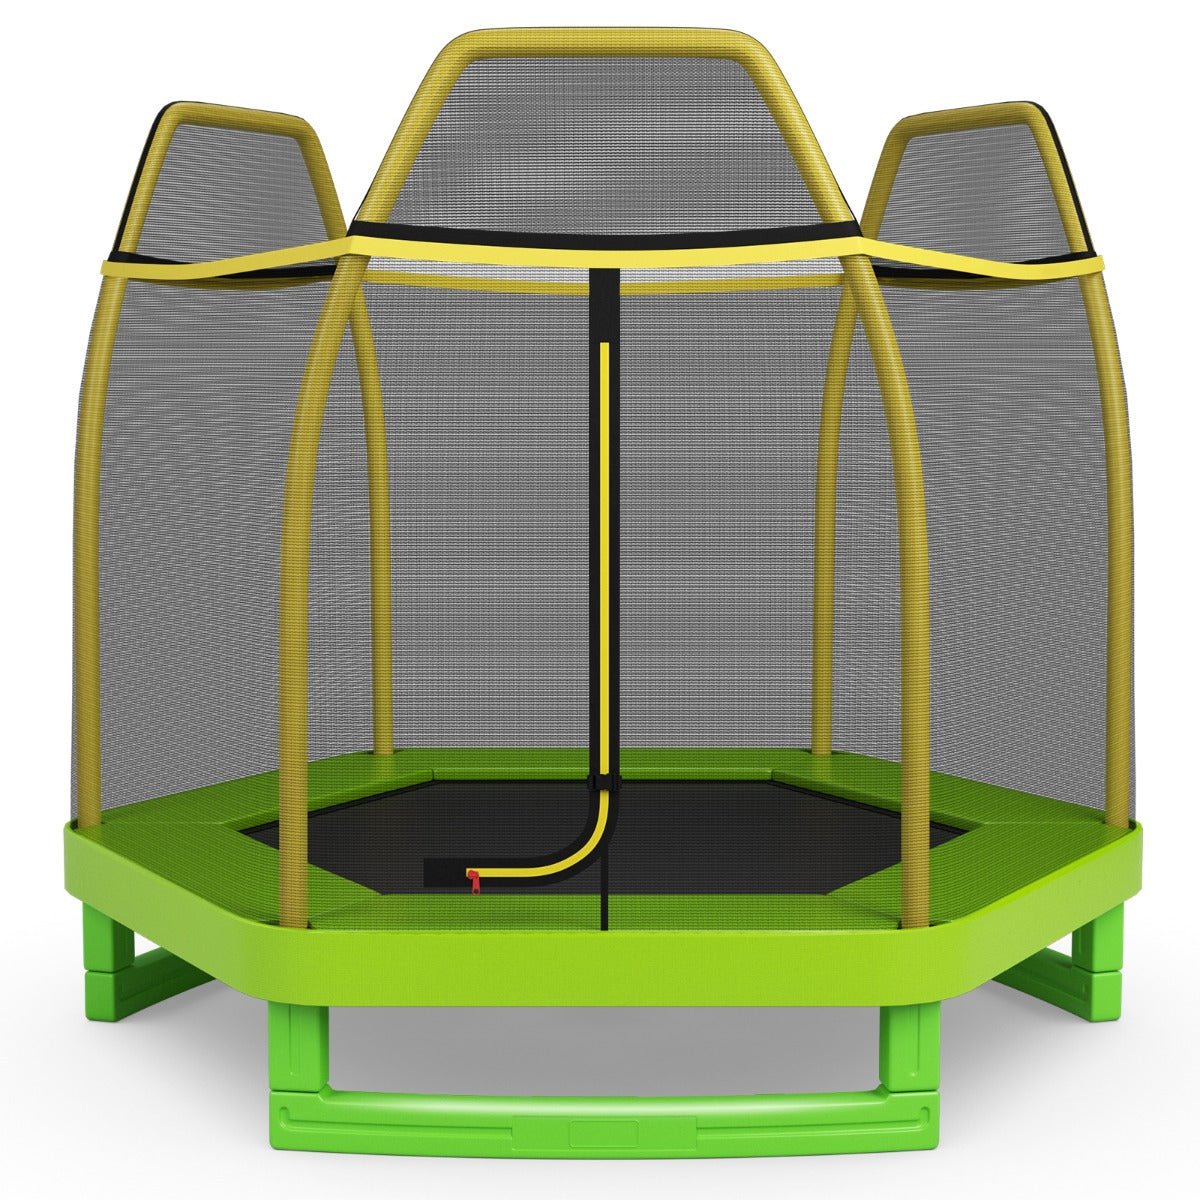 Safe Outdoor Fun: Kids Trampoline with Safety Enclosure Net for Outdoor Play Green